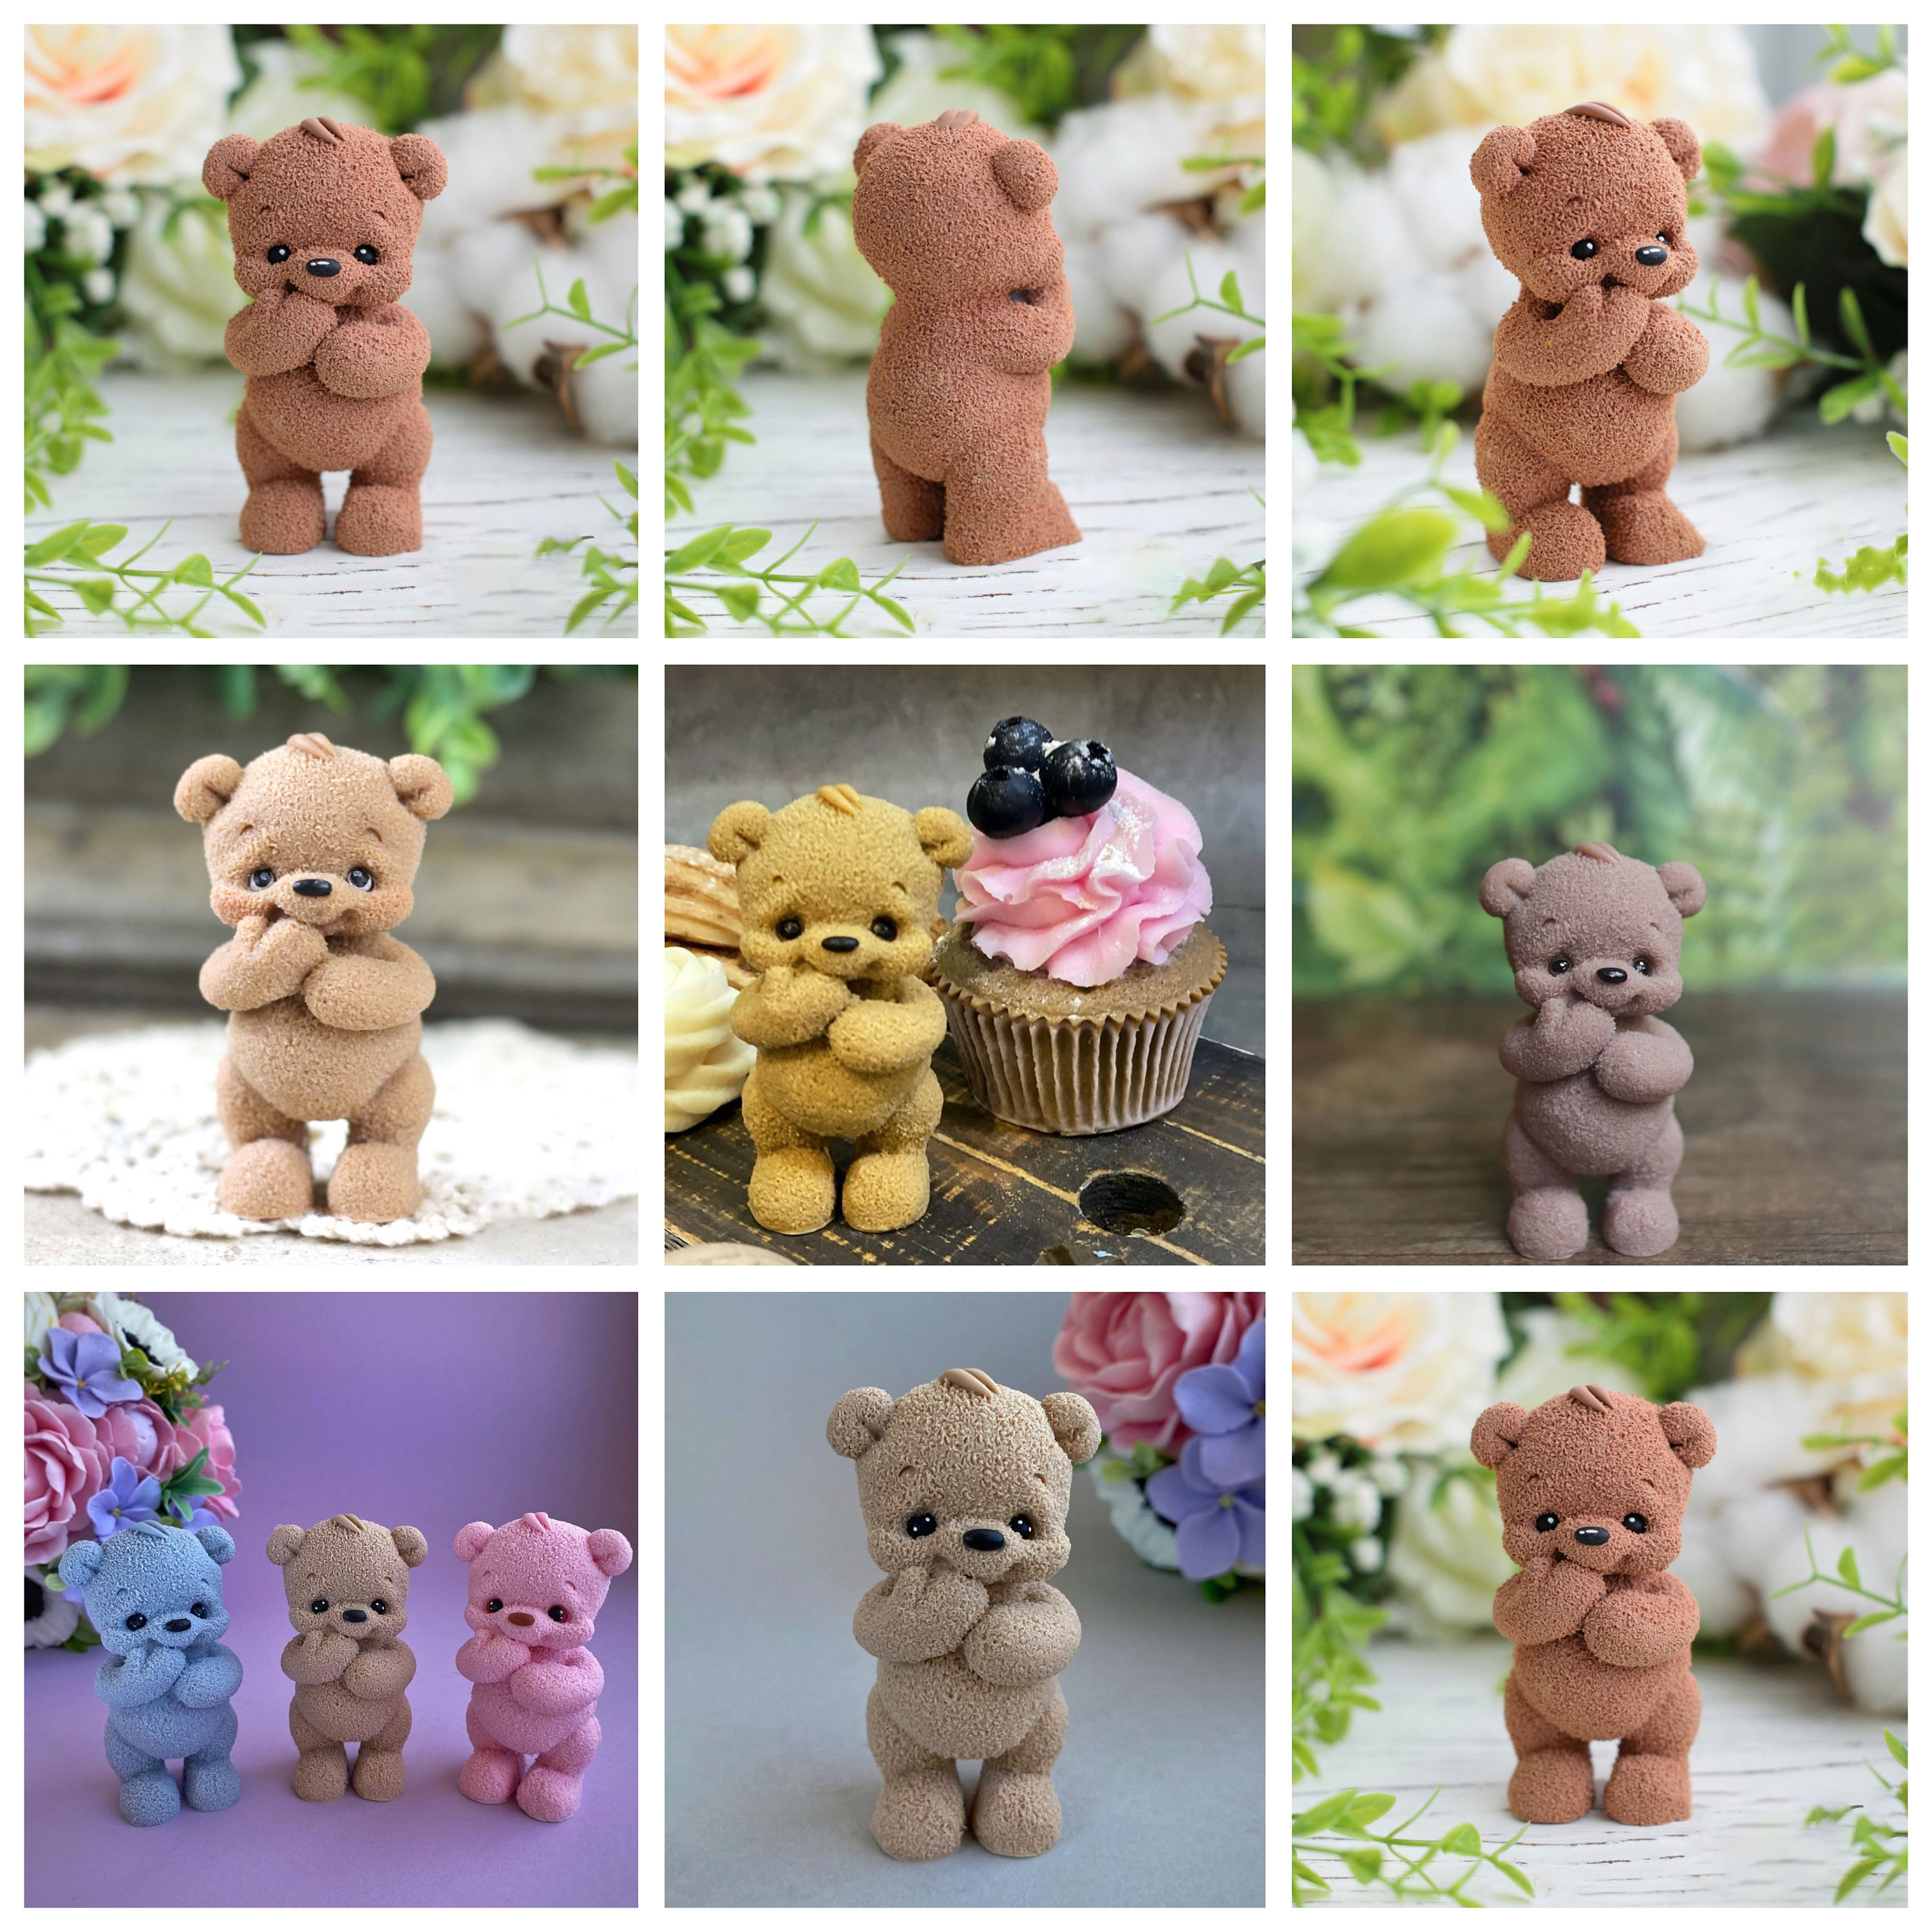 kaiwern 3D Bear Candle Mold, Silicone Candle Molds DIY Baby Bear Mold, 3D  Teddy Bear Silicone Fondant Soap Making Mold for Cake Baking Cupcake Topper